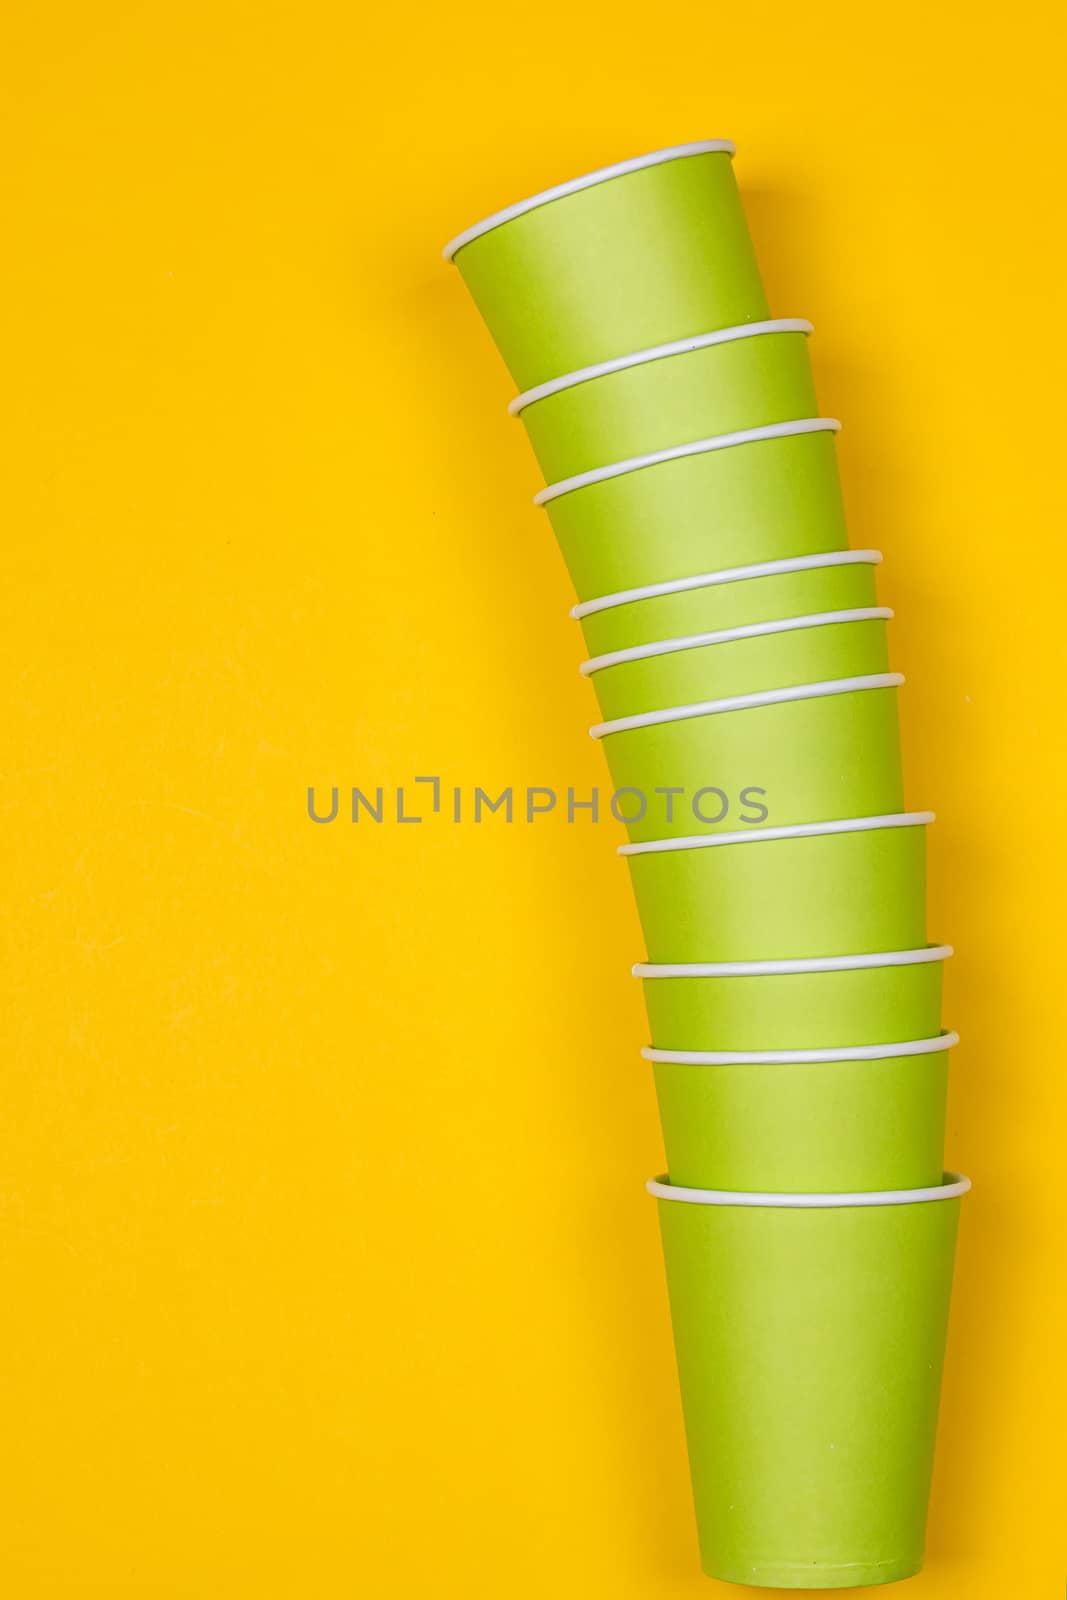 Set of green paper cups on a yellow background